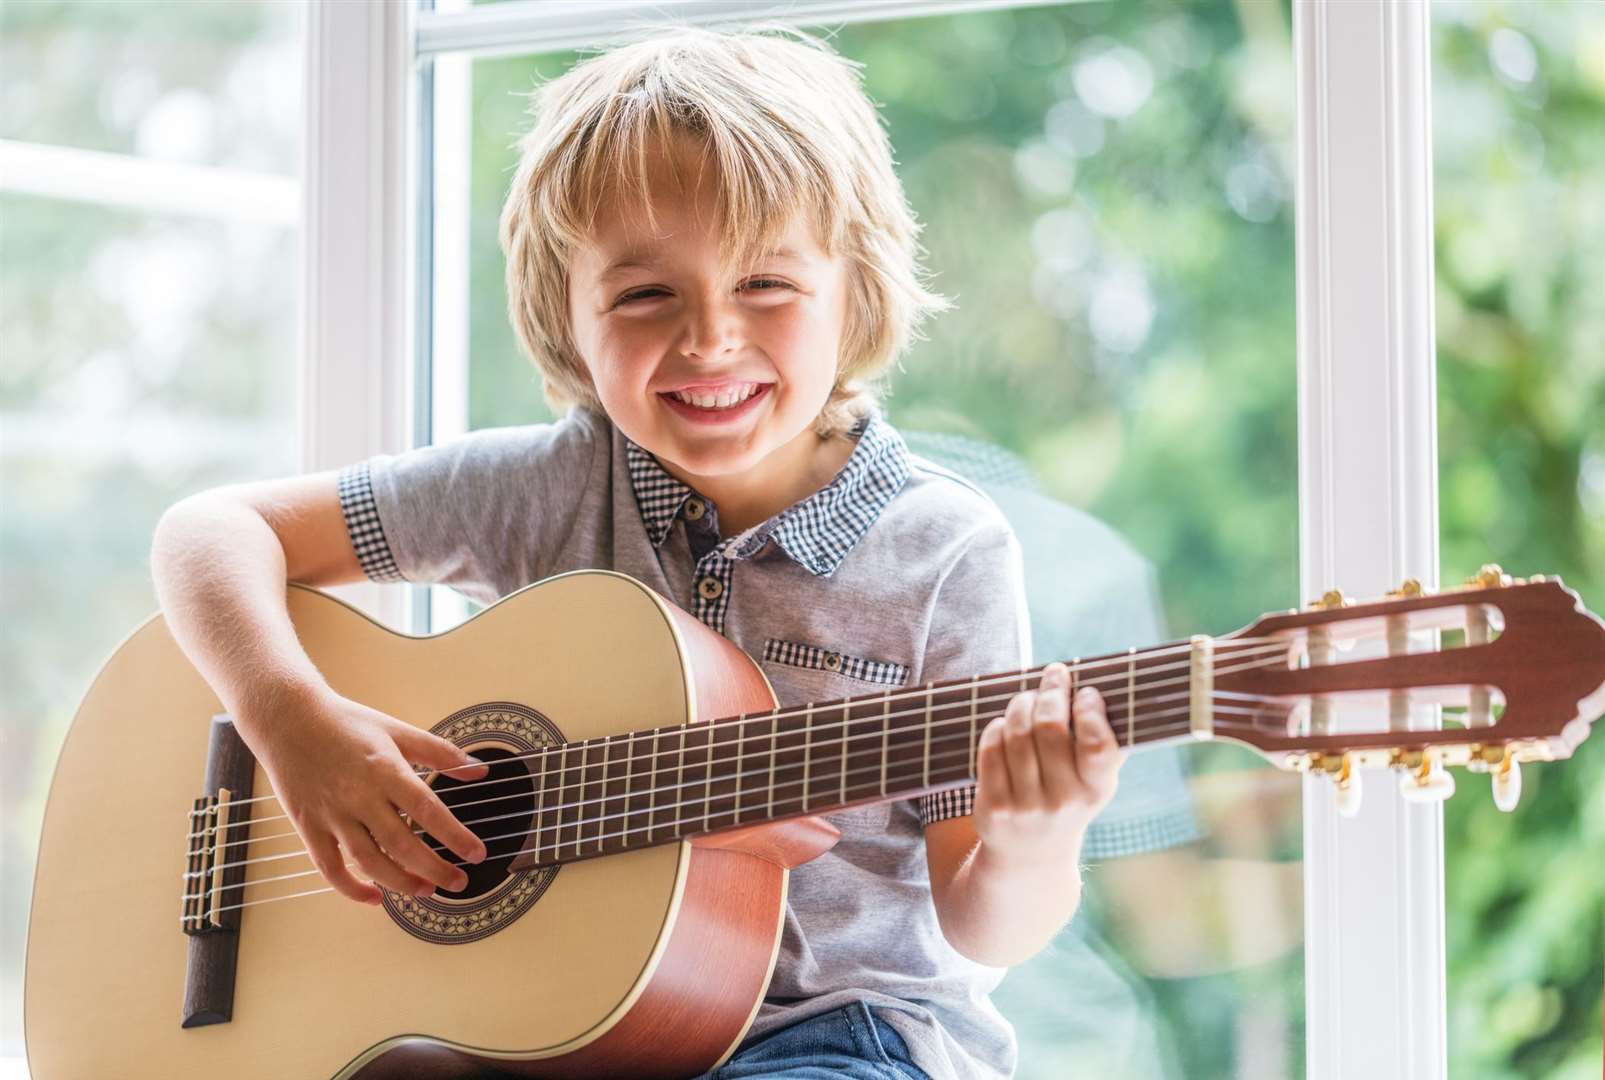 Learn To Play Day encourages children to pick up an instrument